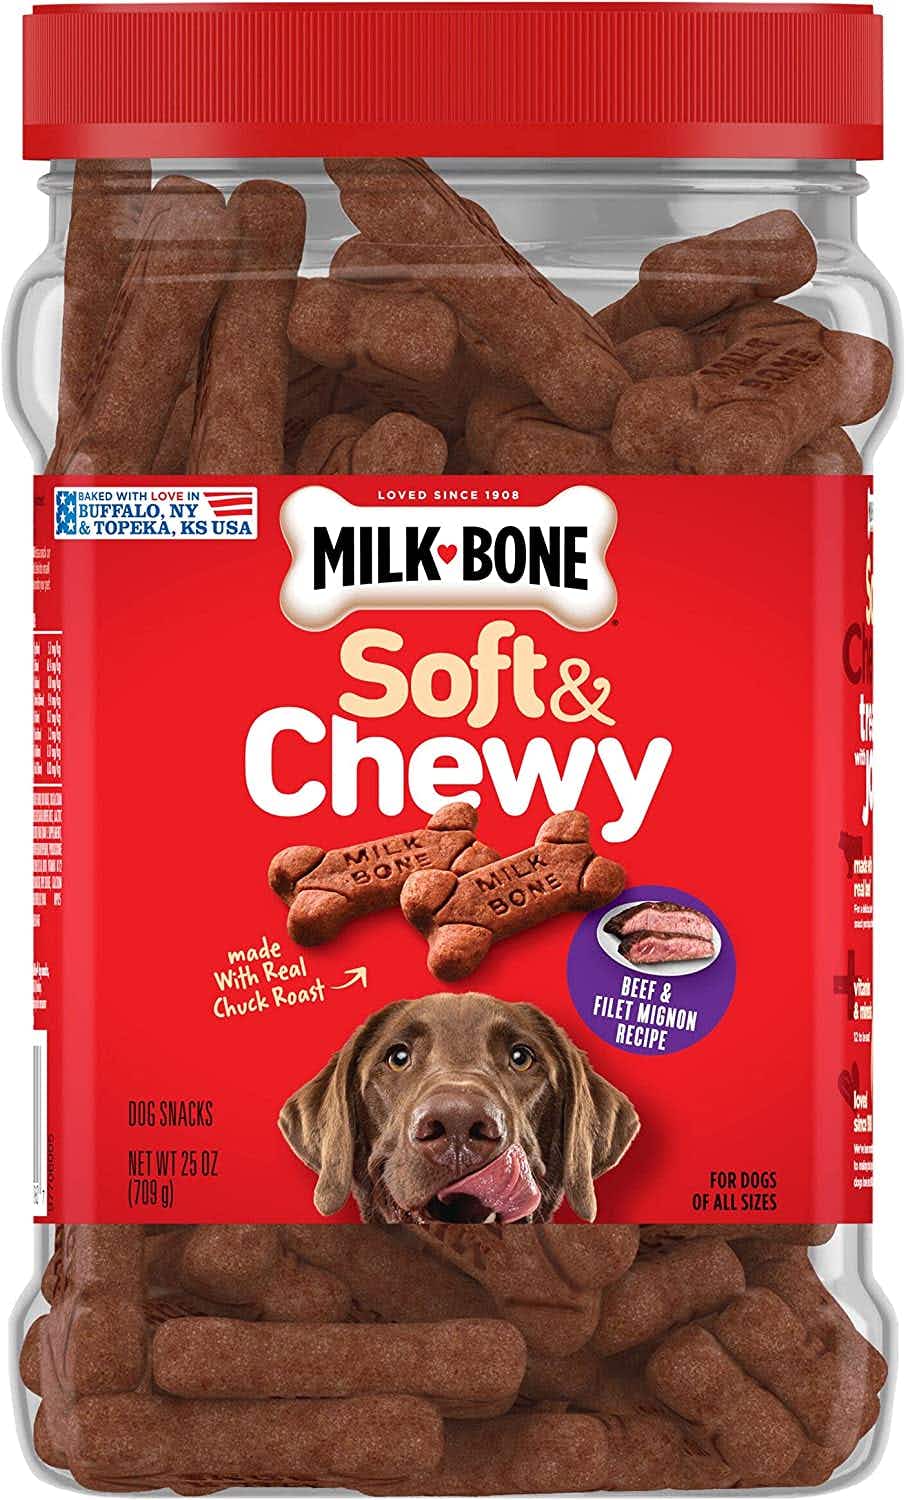 A container of Milk-Bone soft and chewy treats.